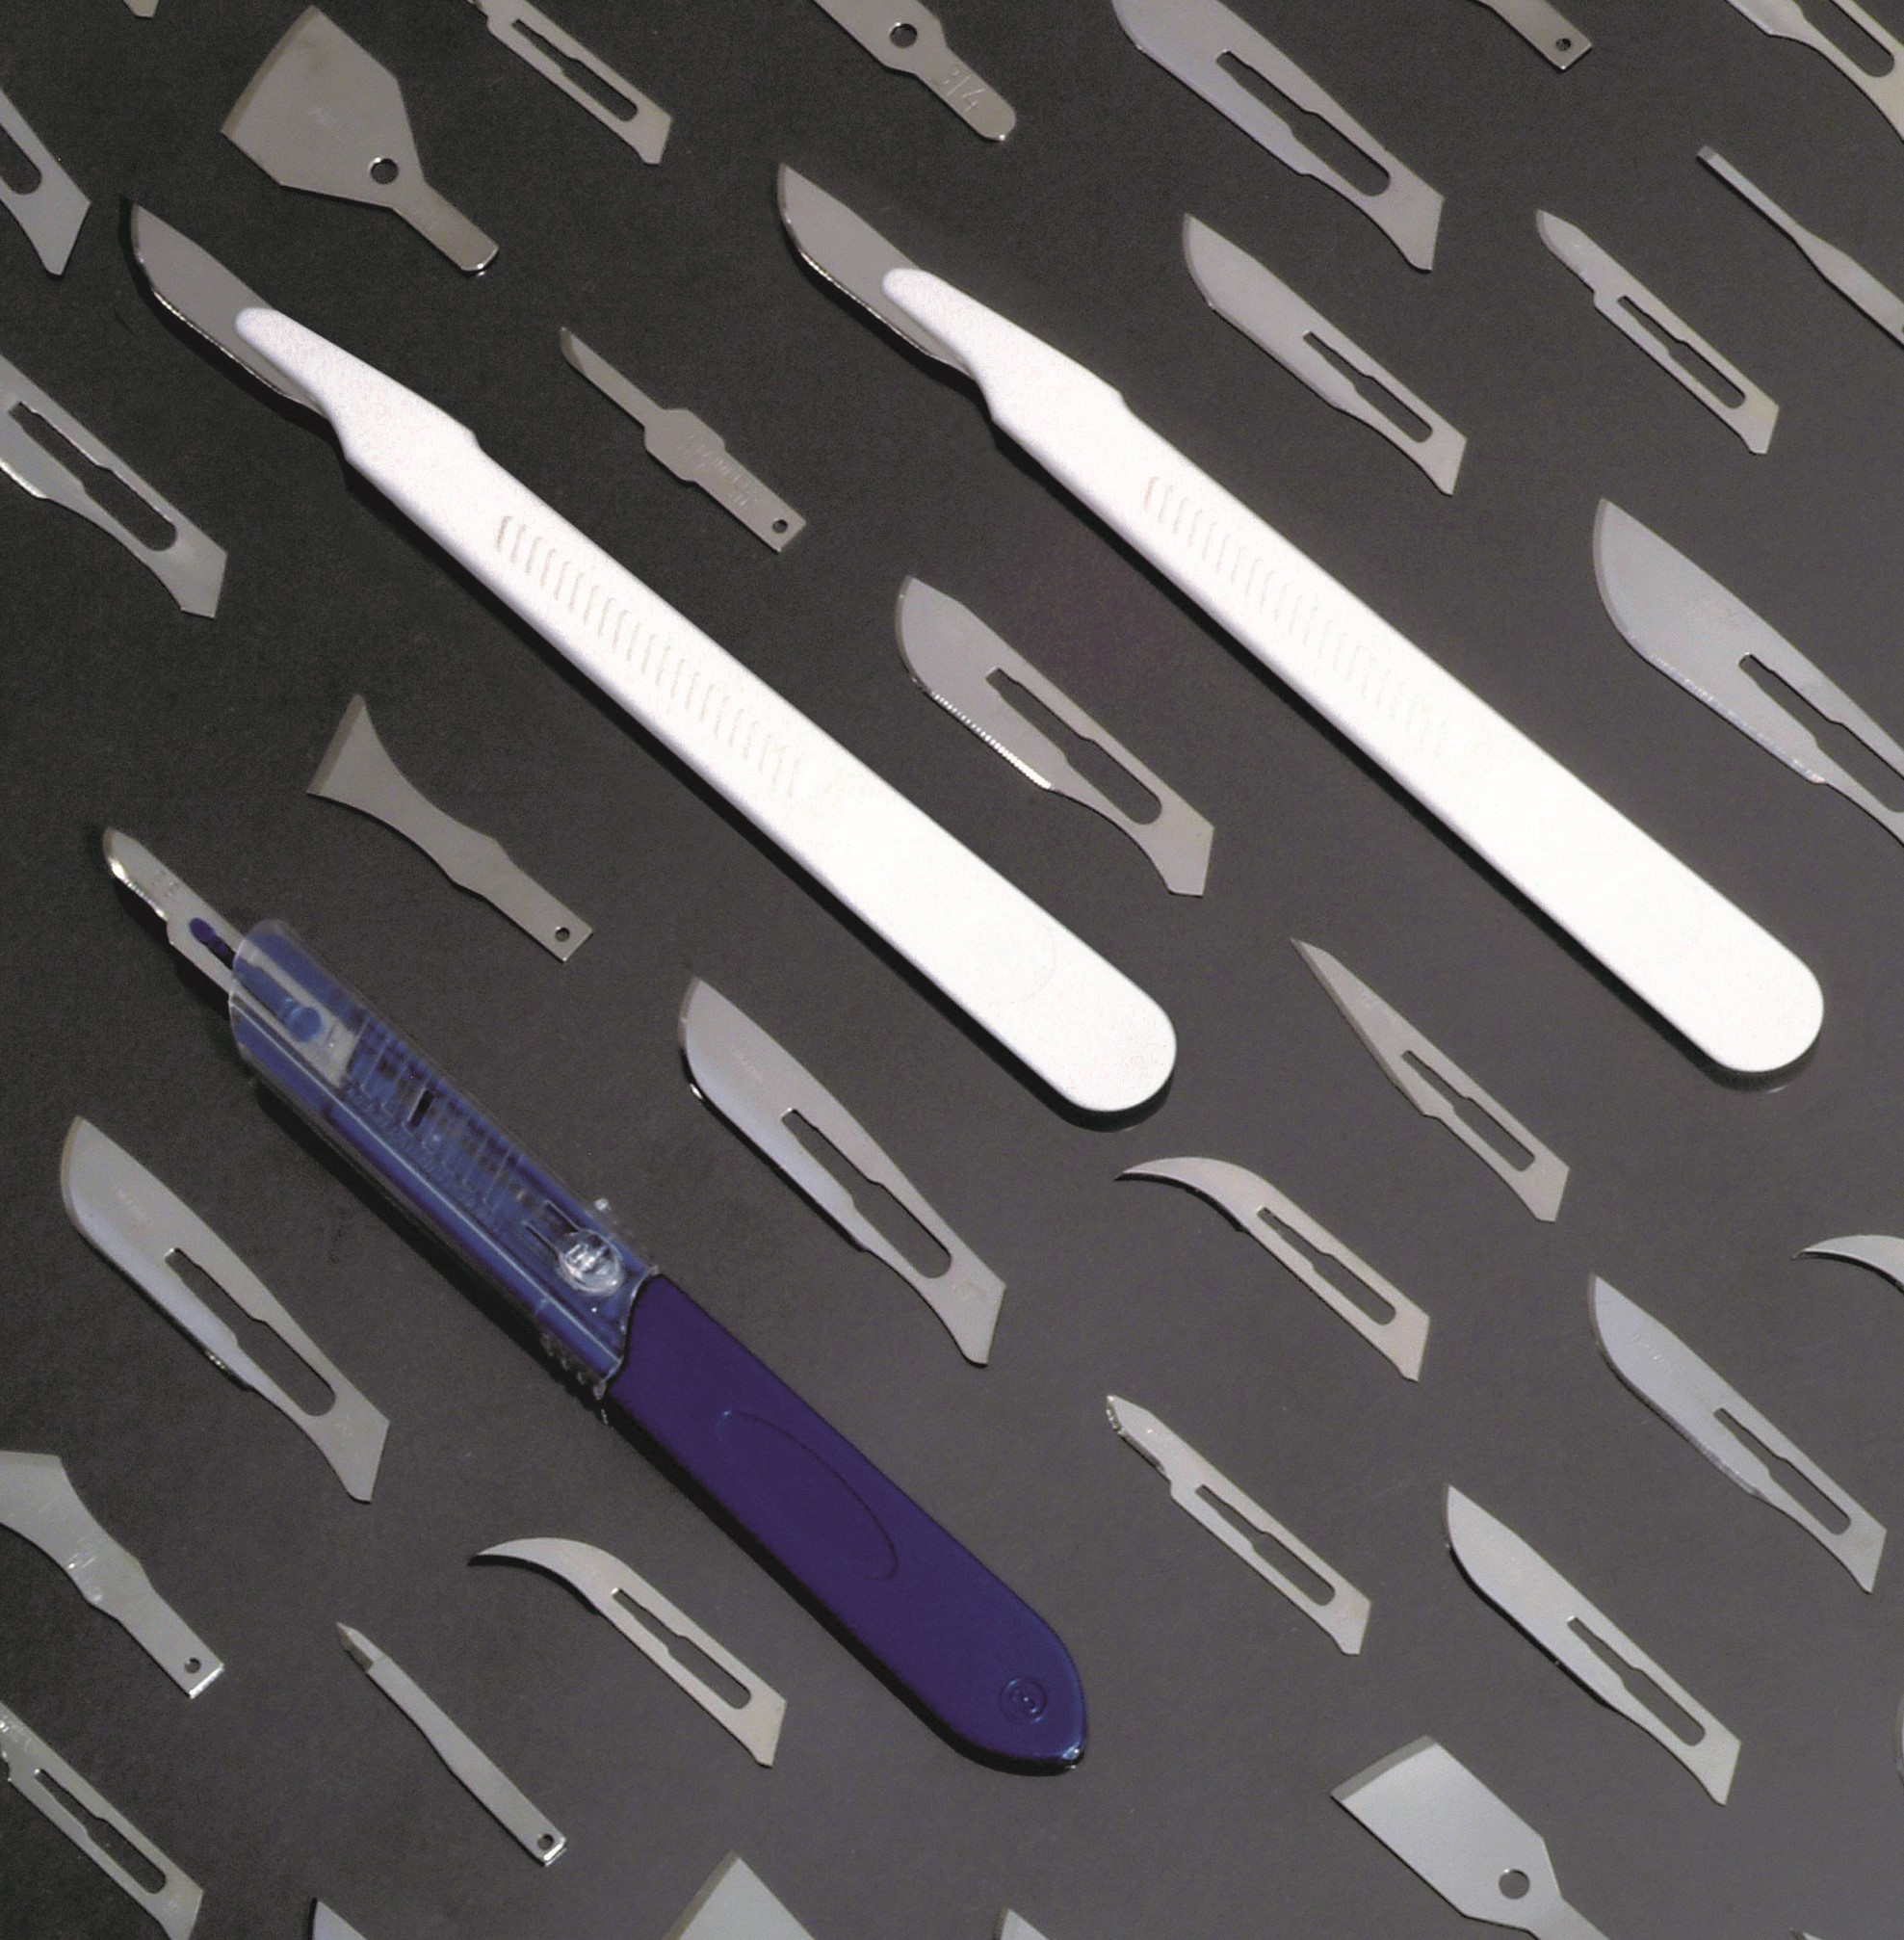 obsidian scalpel medical surgical